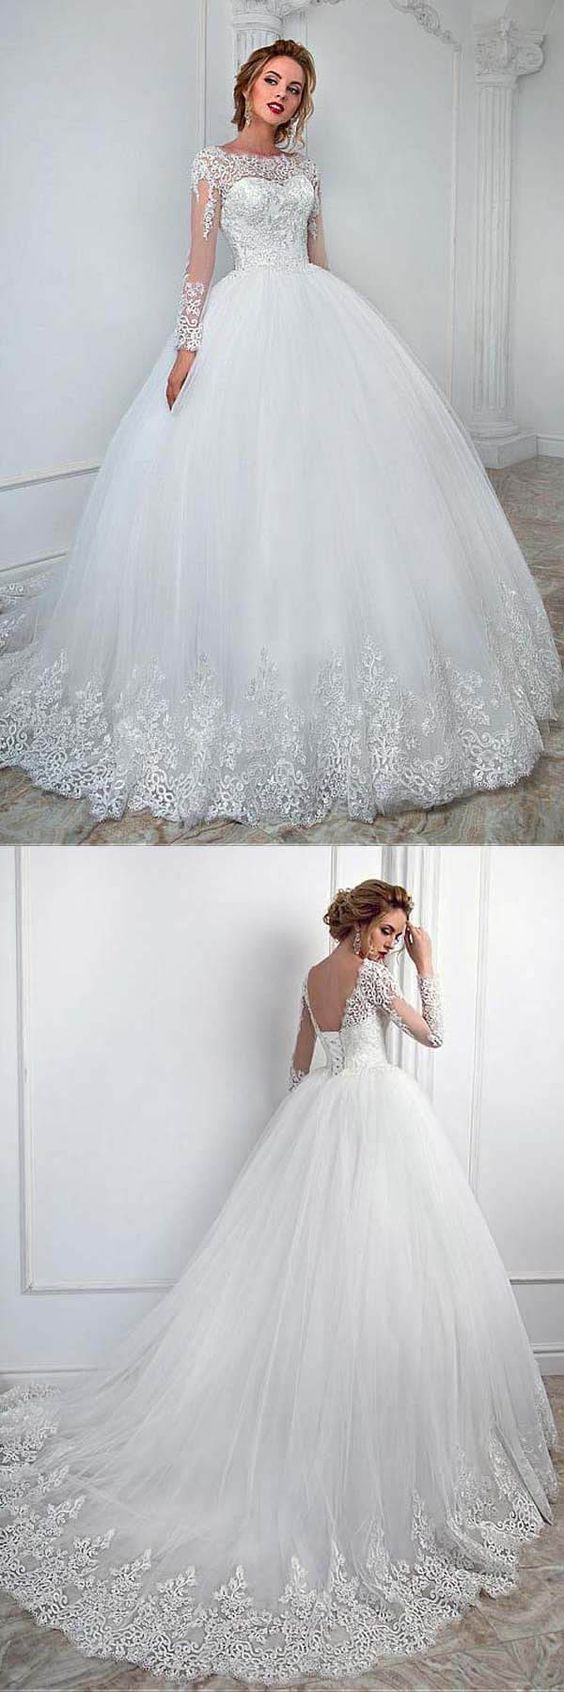 Glamorous Ball Gown Wedding Dresses for 2018 Trends